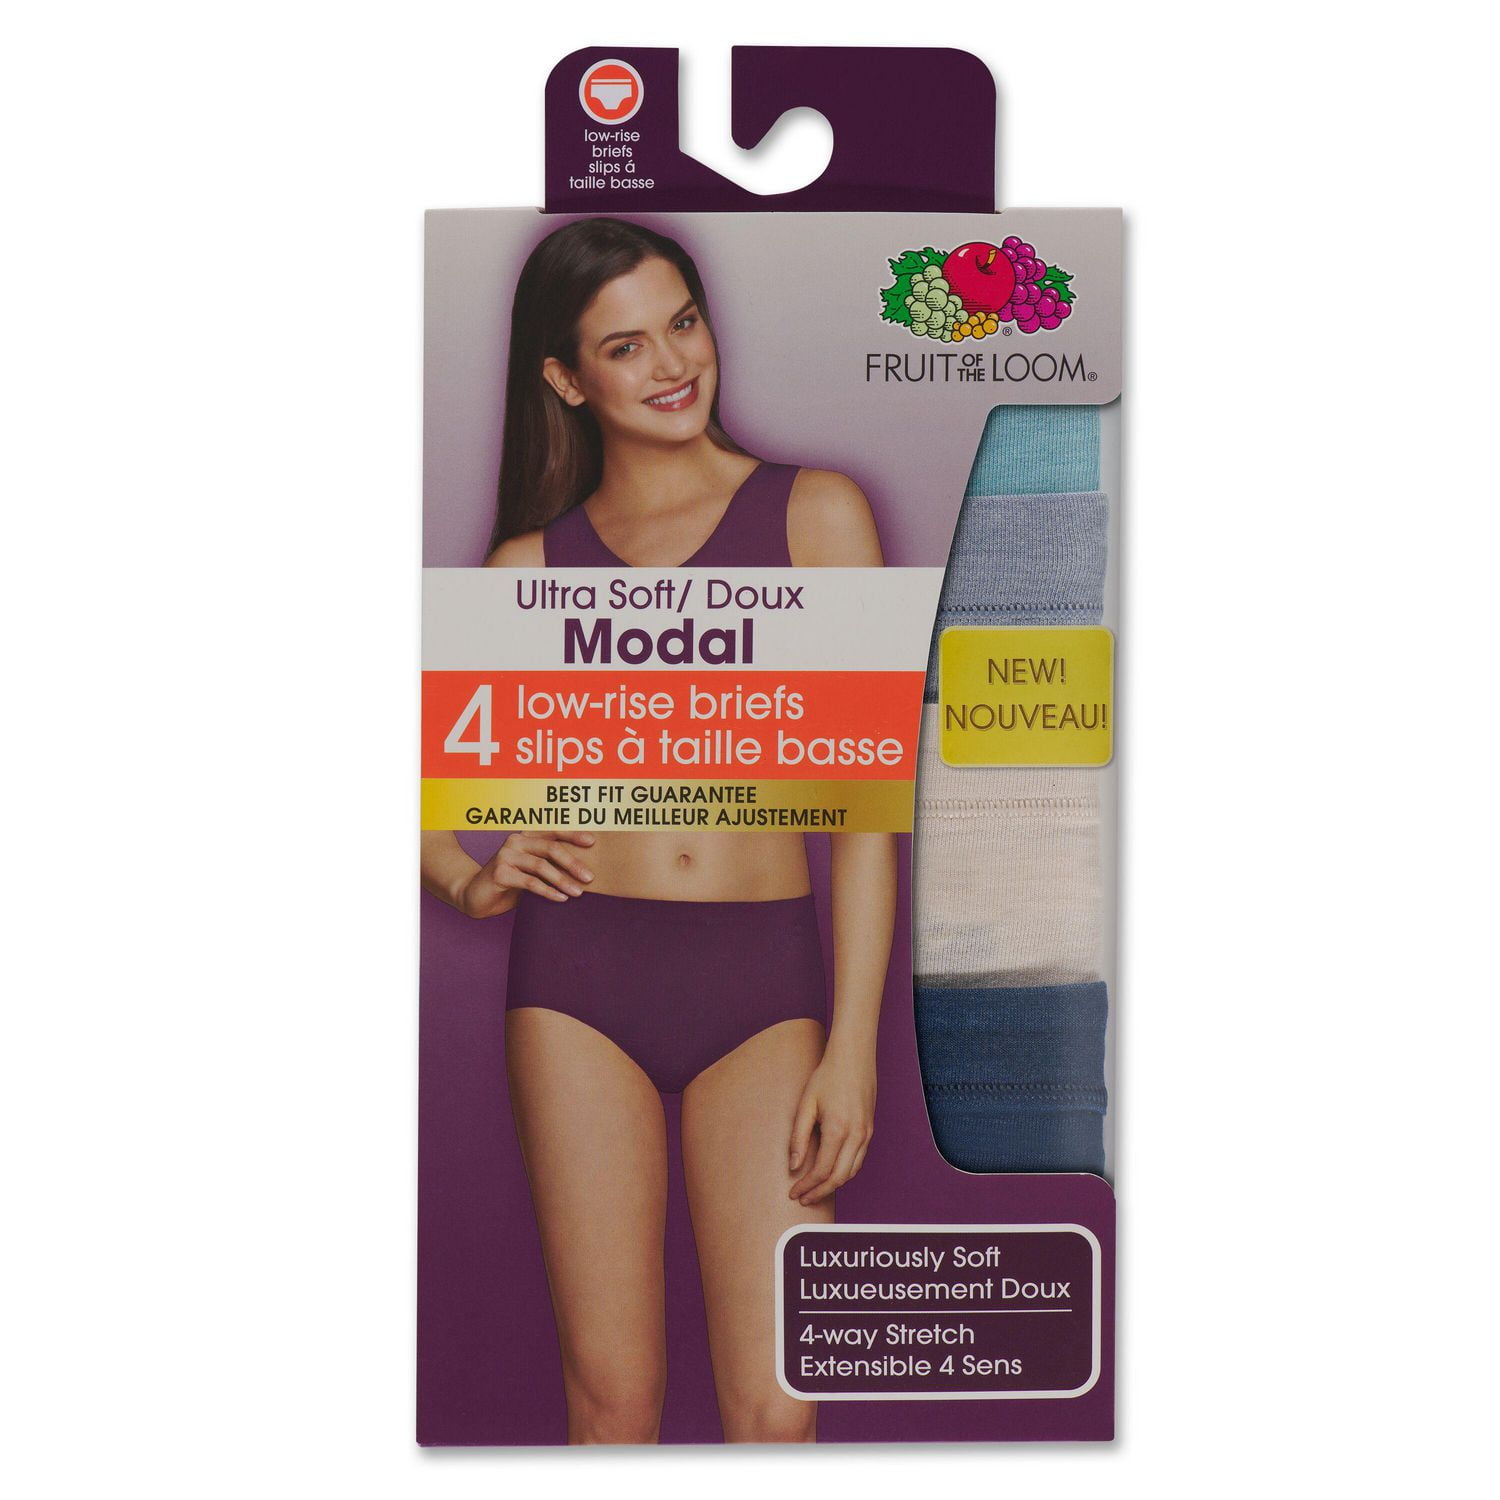 Fruit of the Loom Women's Ultra Soft Modal Hipster Underwear, 4 pack, Sizes:  5 - 8 